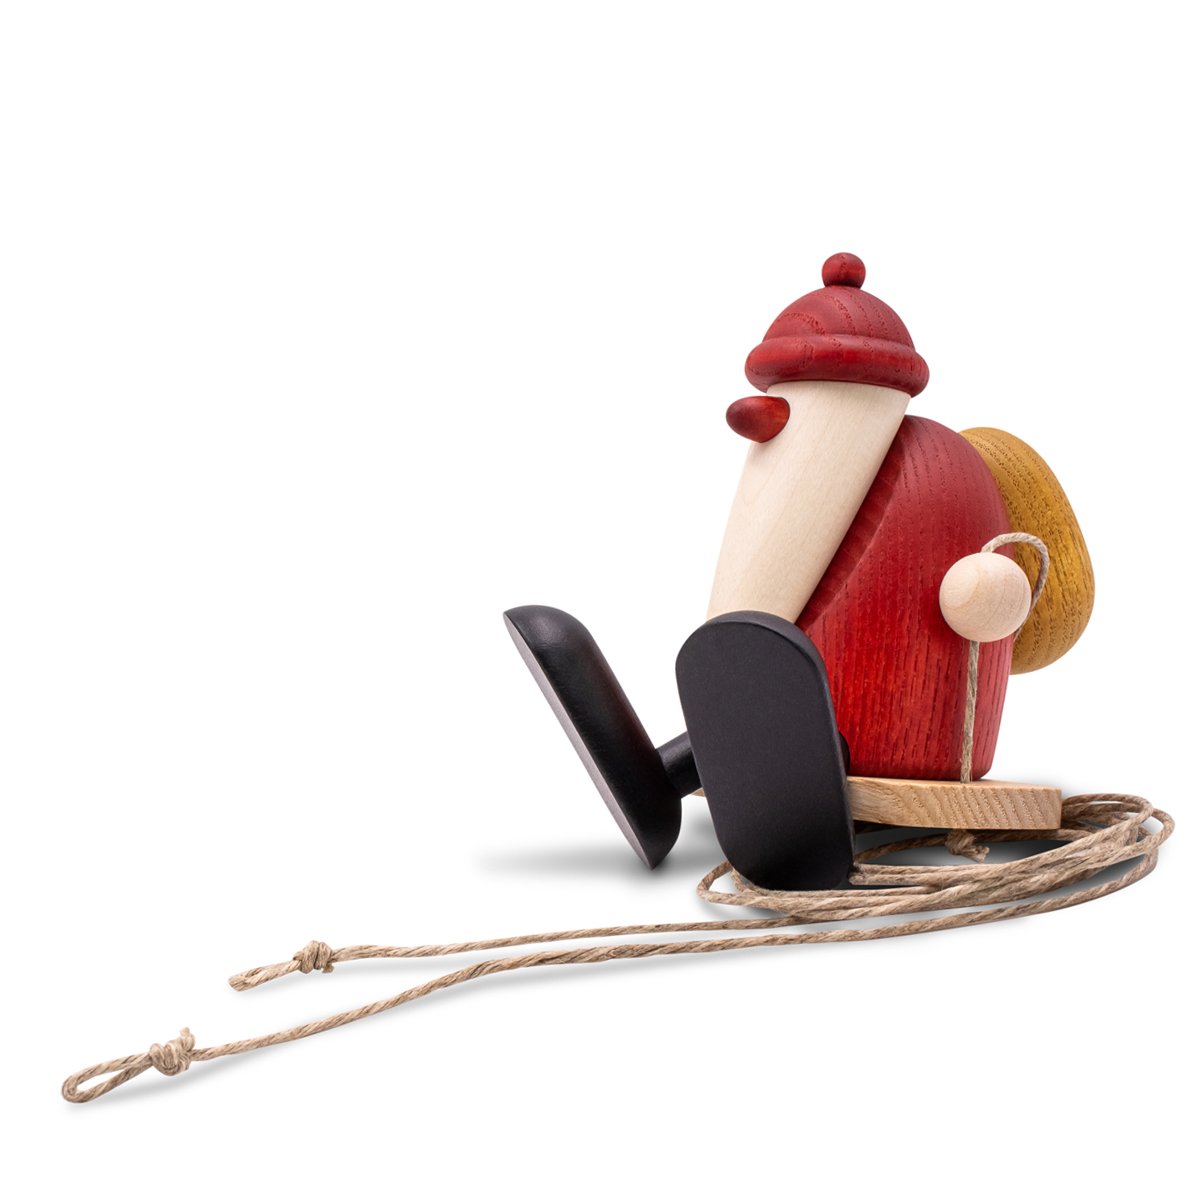 Santa Claus on a swing, small